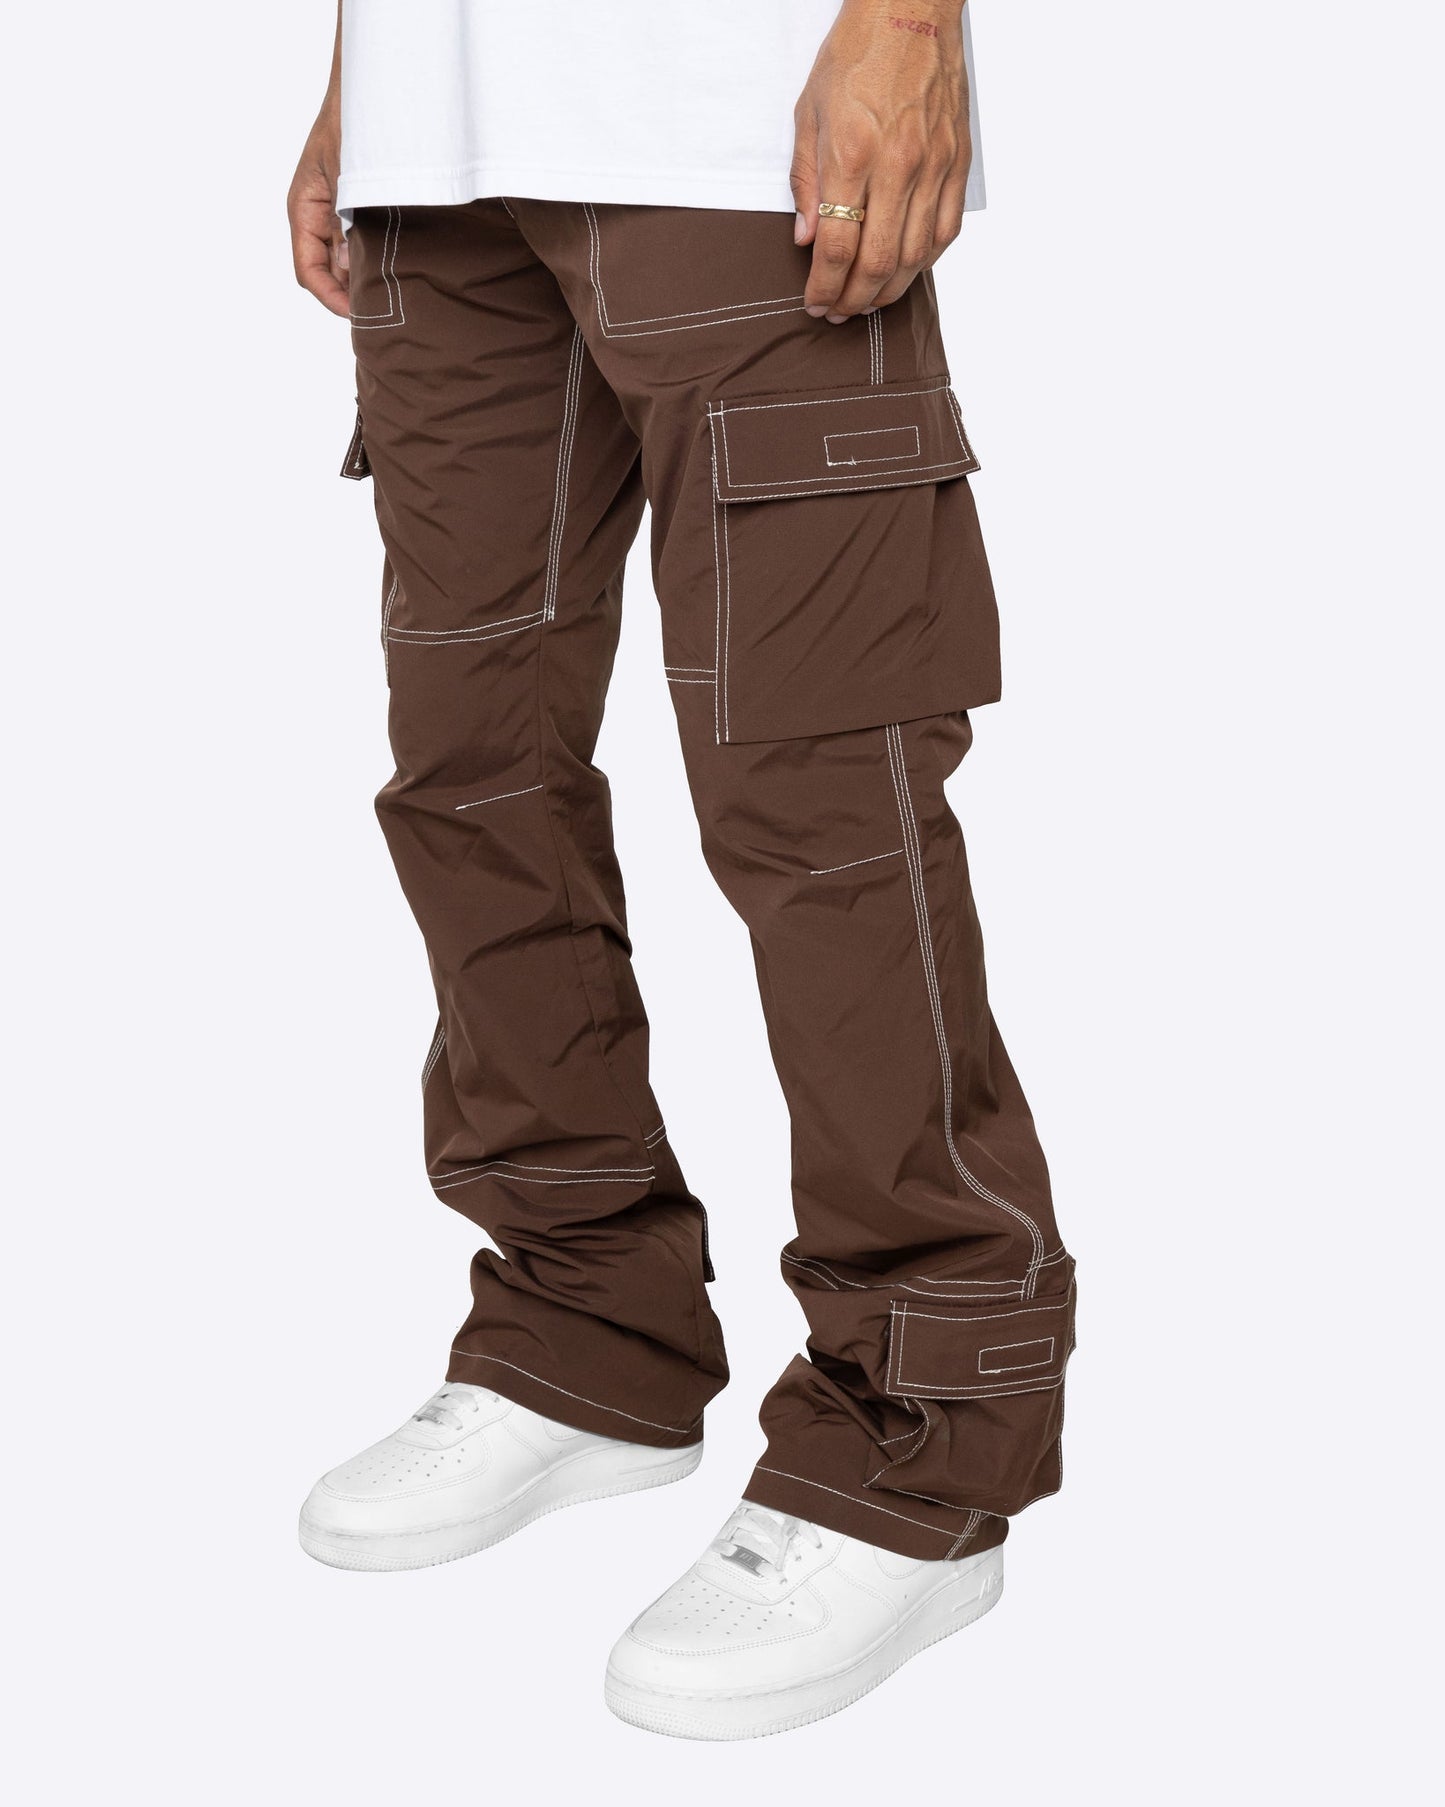 eptm mens collab cargo pants brown - 8586